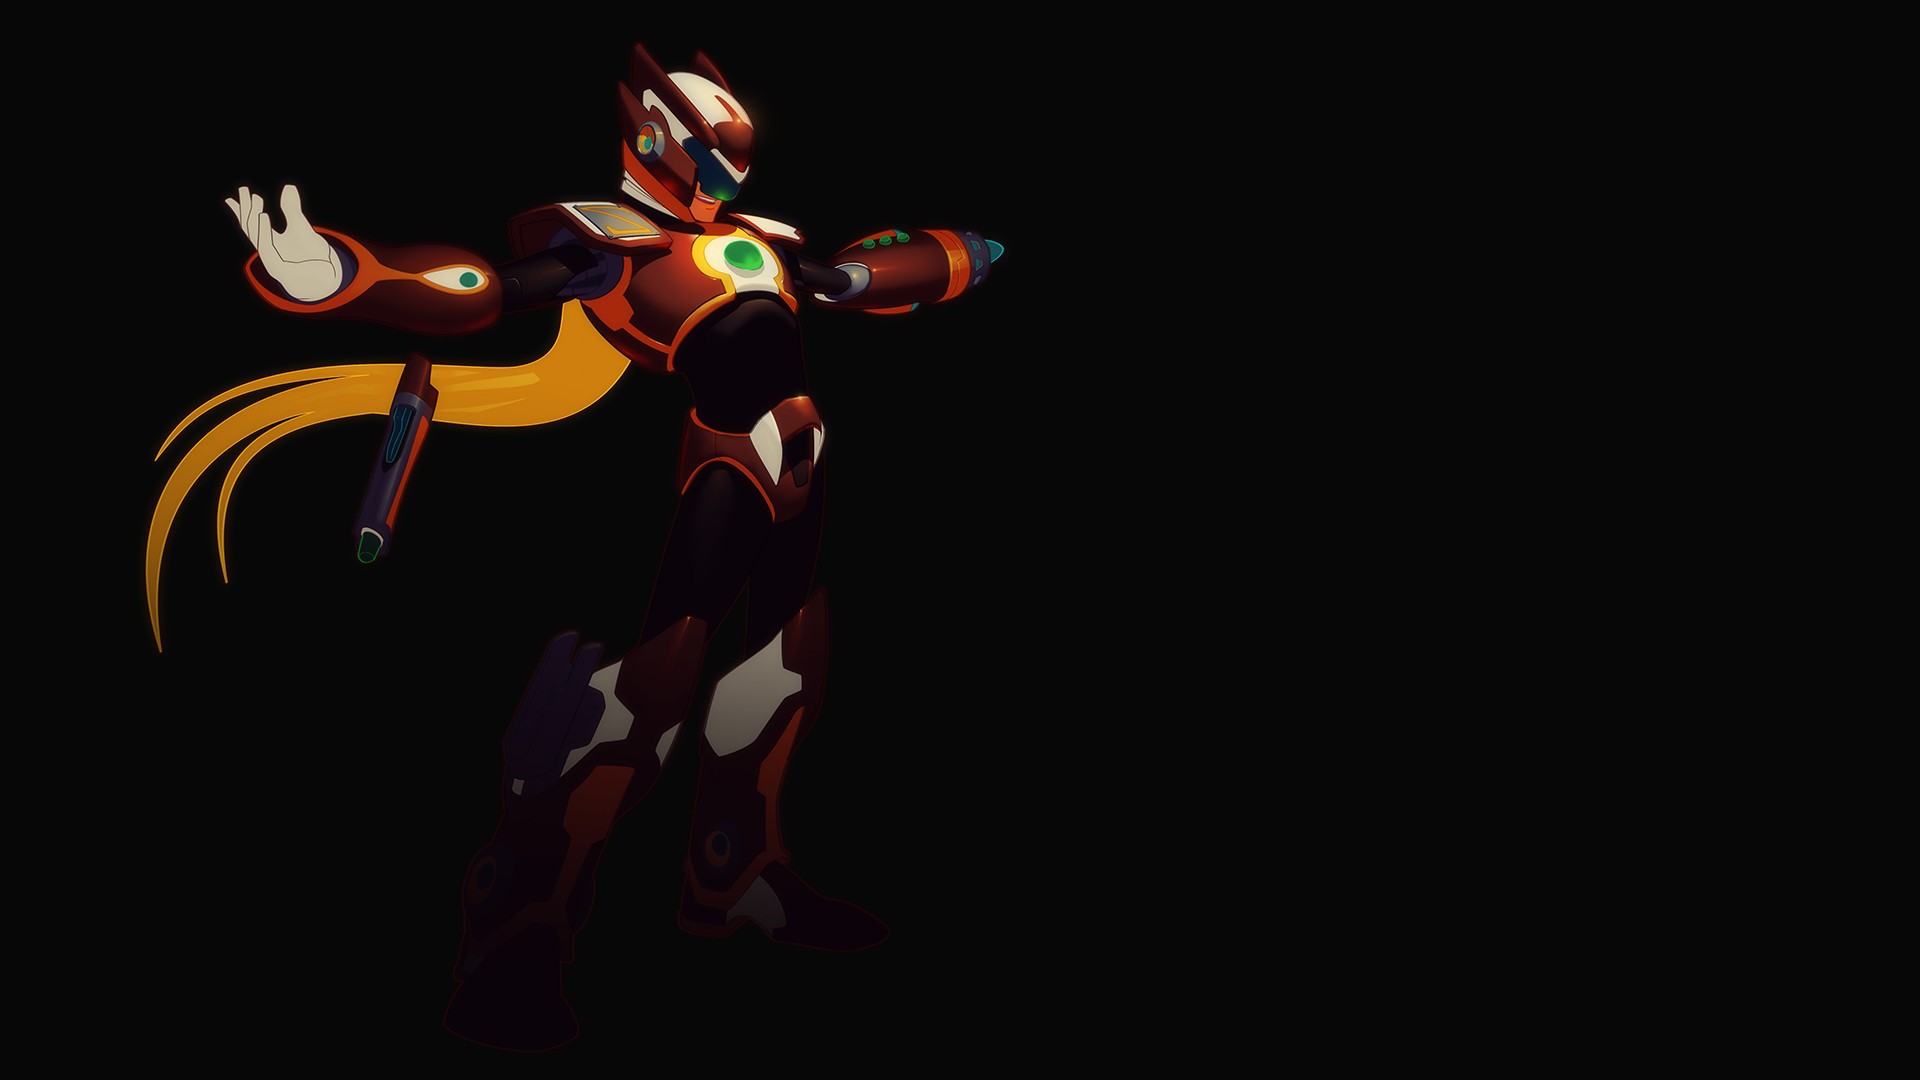 Game Megaman Zero wallpapers and images   wallpapers